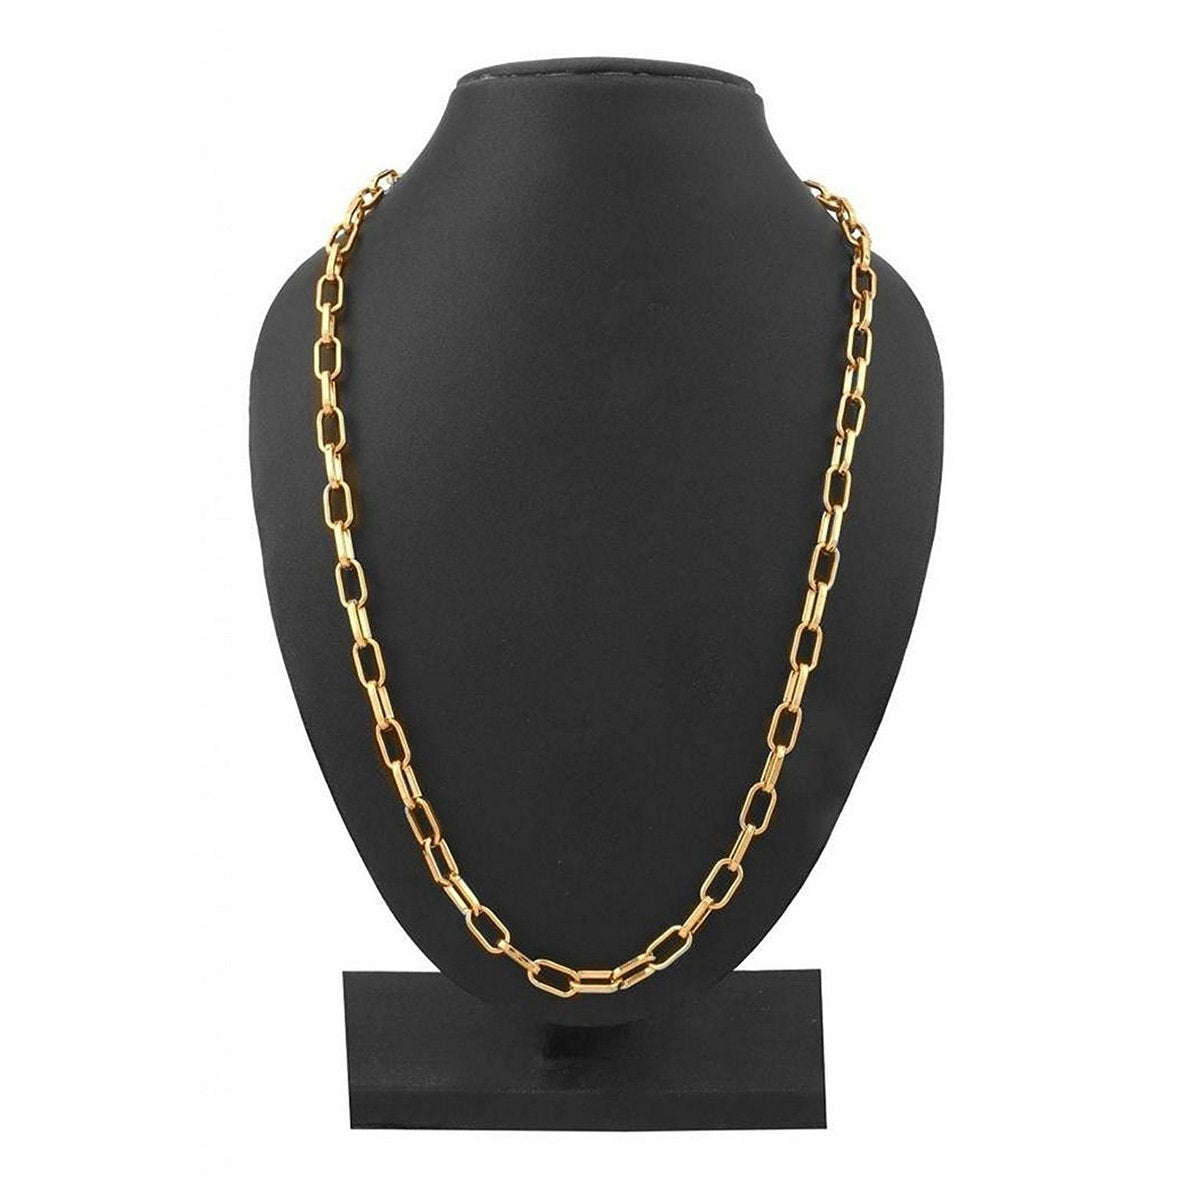 Gold Stainless Steel Italian Oval Link Cable Belcher Chain 23"